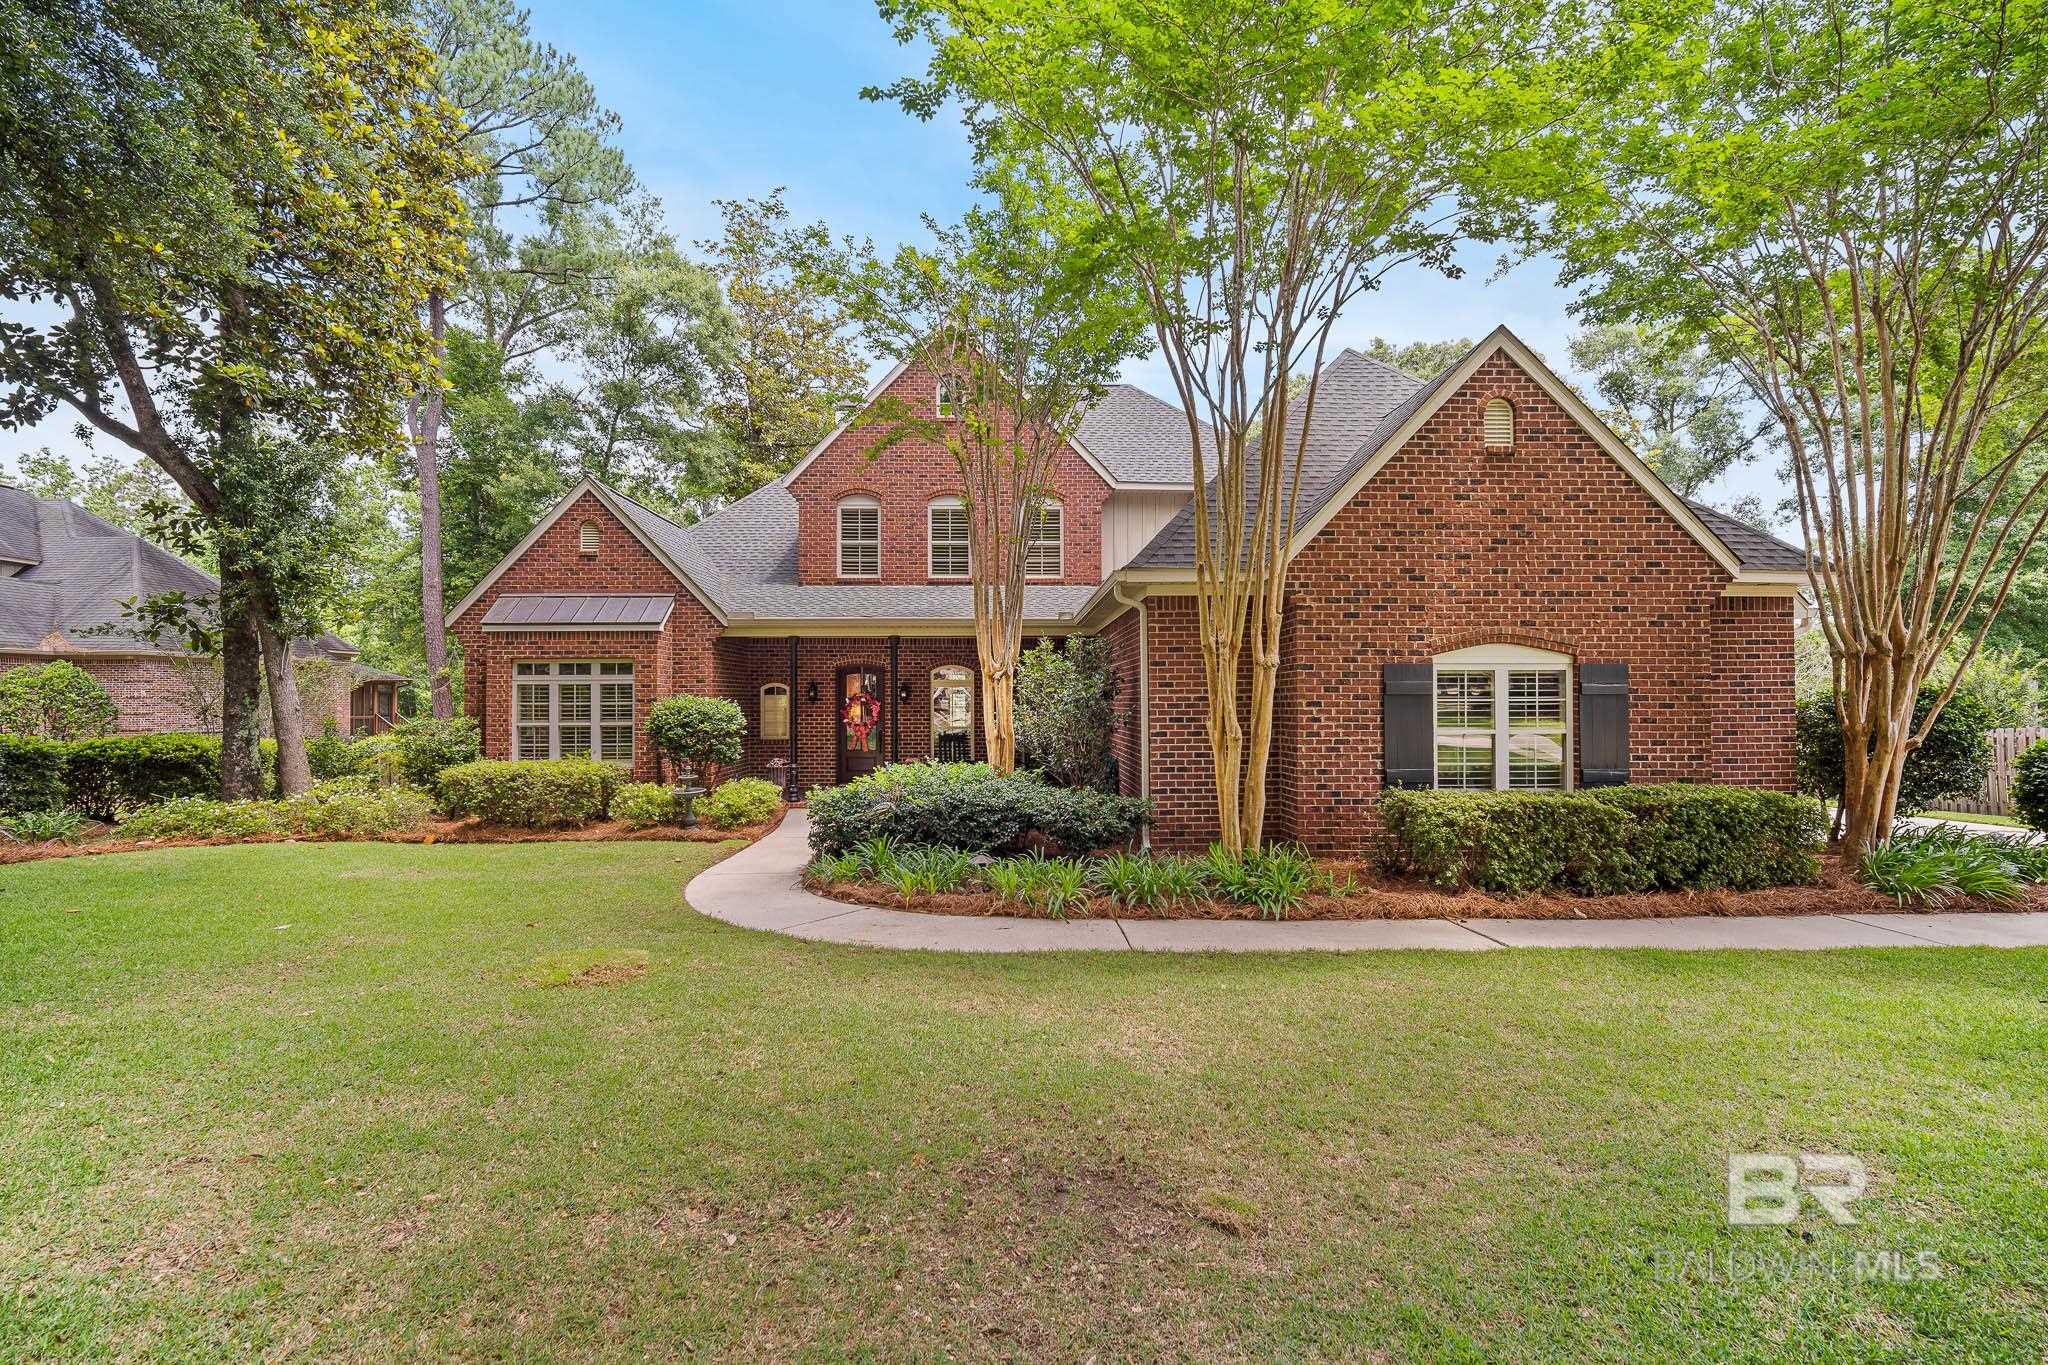 Beautiful, custom brick home sits perfectly on just over an acre lot in the Woodlands at Malbis. From the moment you step inside, you will love the soaring ceiling and abundance of natural light in the spacious living room, complete with hardwood floors, wood burning fireplace with a lovely wood mantle and custom bookcase with storage. The kitchen is spacious and boasts plenty of storage, granite countertops, a center island with seating, a gas range and stainless appliances including double ovens and a wine cooler. You can relax by the fireplace in the gathering room located just off the kitchen or enjoy the view of the pool in the heated & cooled sunroom. The very spacious primary bedroom has a vaulted ceiling and an en-suite with separate vanities, jetted tub and HUGE walk-in closet. There is an office/study on the main level that could also be a 5th bedroom. Upstairs you will find three additional bedrooms, one with a vaulted ceiling and one with an en-suite. Enjoy the covered patio with Trex decking that is perfect for entertaining. The best part of the backyard has to be taking a splash in your own private pool! The professionally landscaped lot goes beyond the fence in the back and also has security lighting. Home has a new Bronze certified roof in April 2022, new HVAC upstairs in 2021 and downstairs in 2019. If you are looking for space, convenience, a well-built home with a pool, all in a great subdivision close to public and private schools, you don’t want to miss this one!